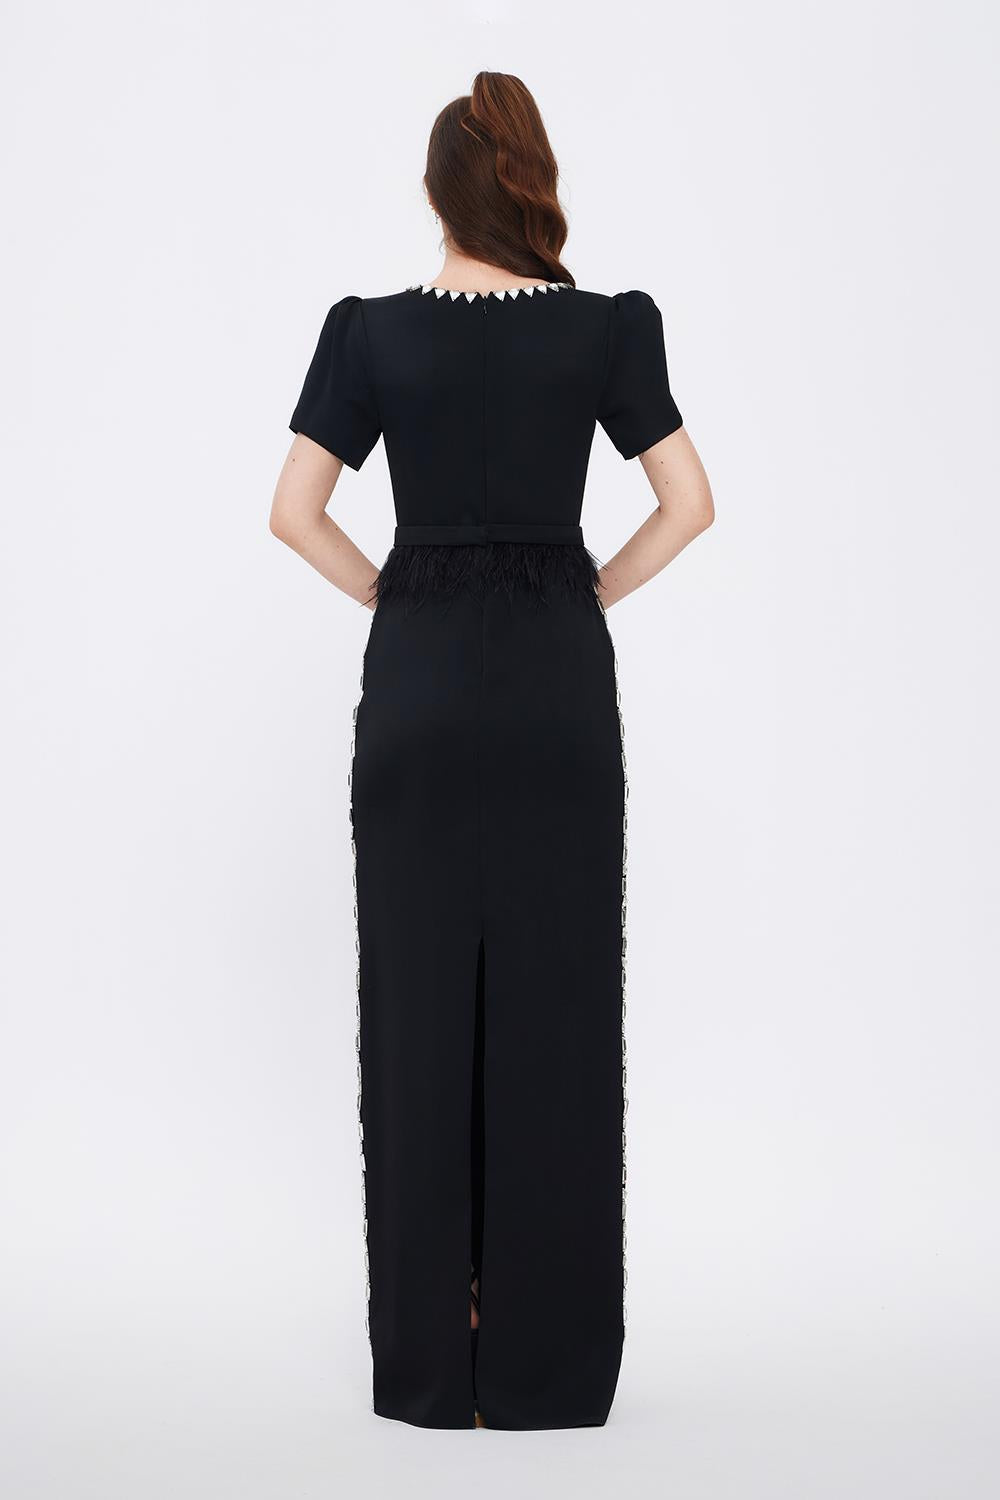 Stone Embroidered Long Black Evening Dress